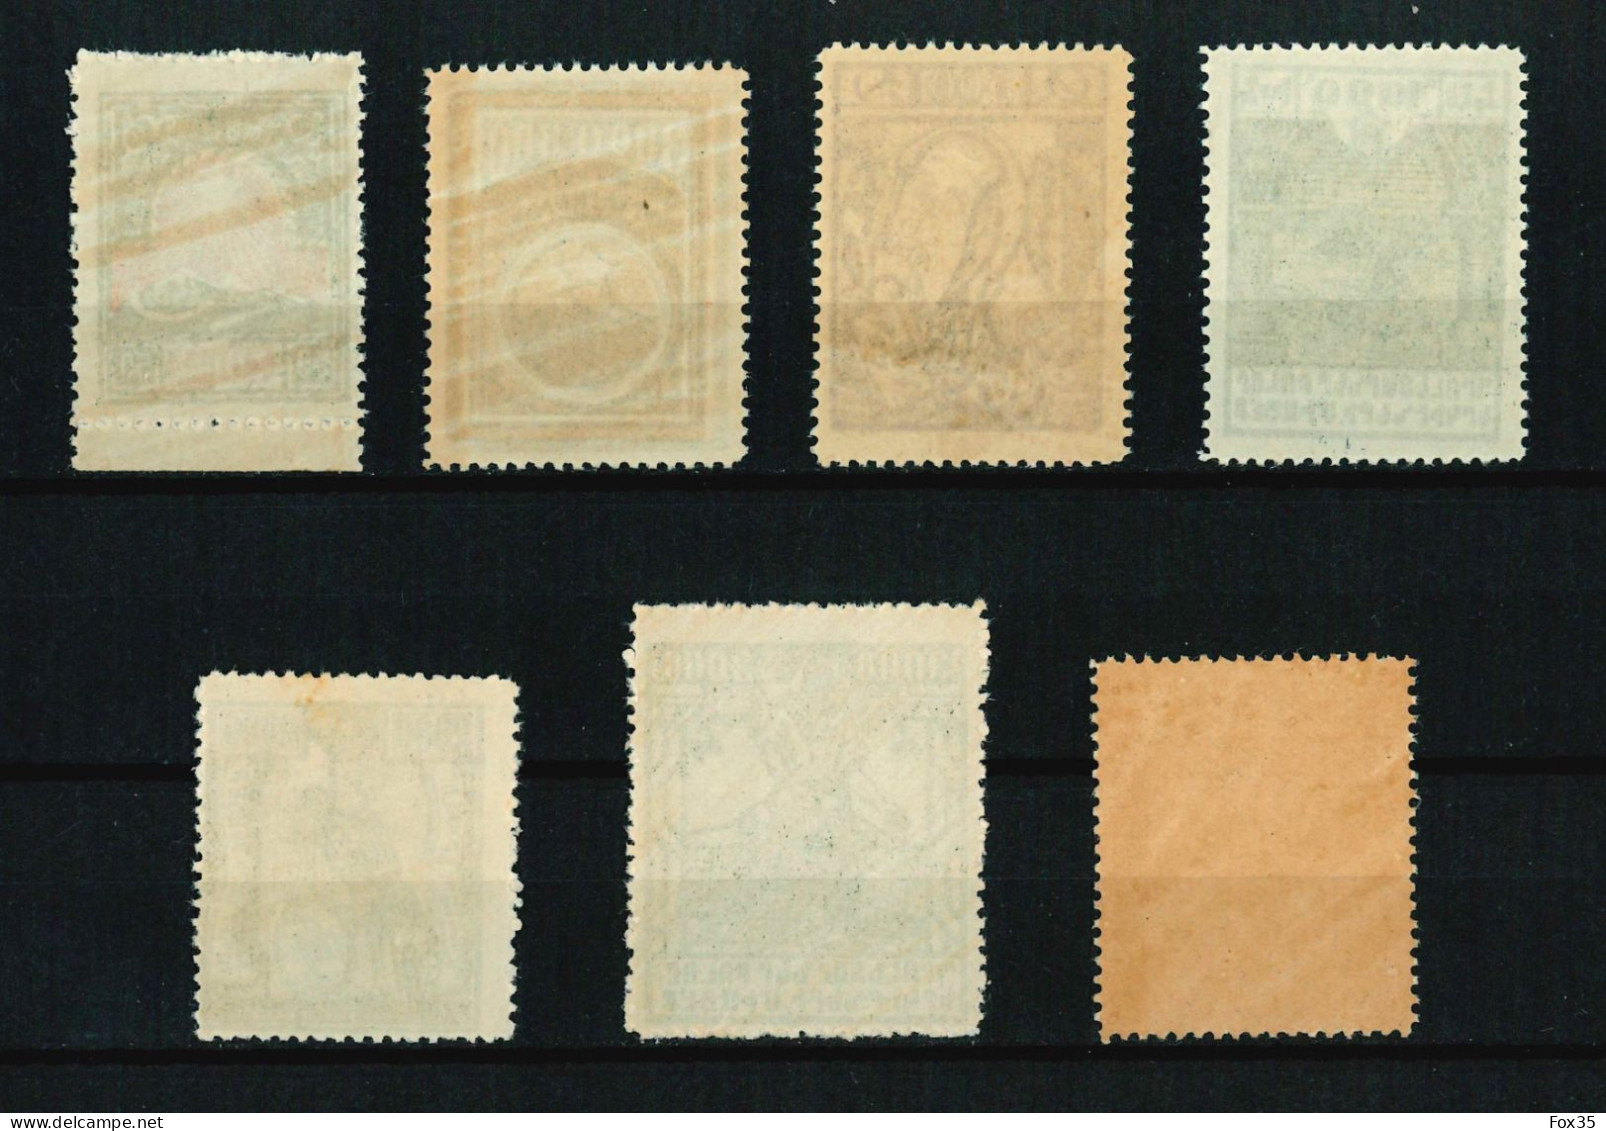 Armenia 1919-1923, 1922 The Erivan Pictorials Issue, Almost Complete Set, MNH, Sold As Genuine, CV 21€ - Armenien